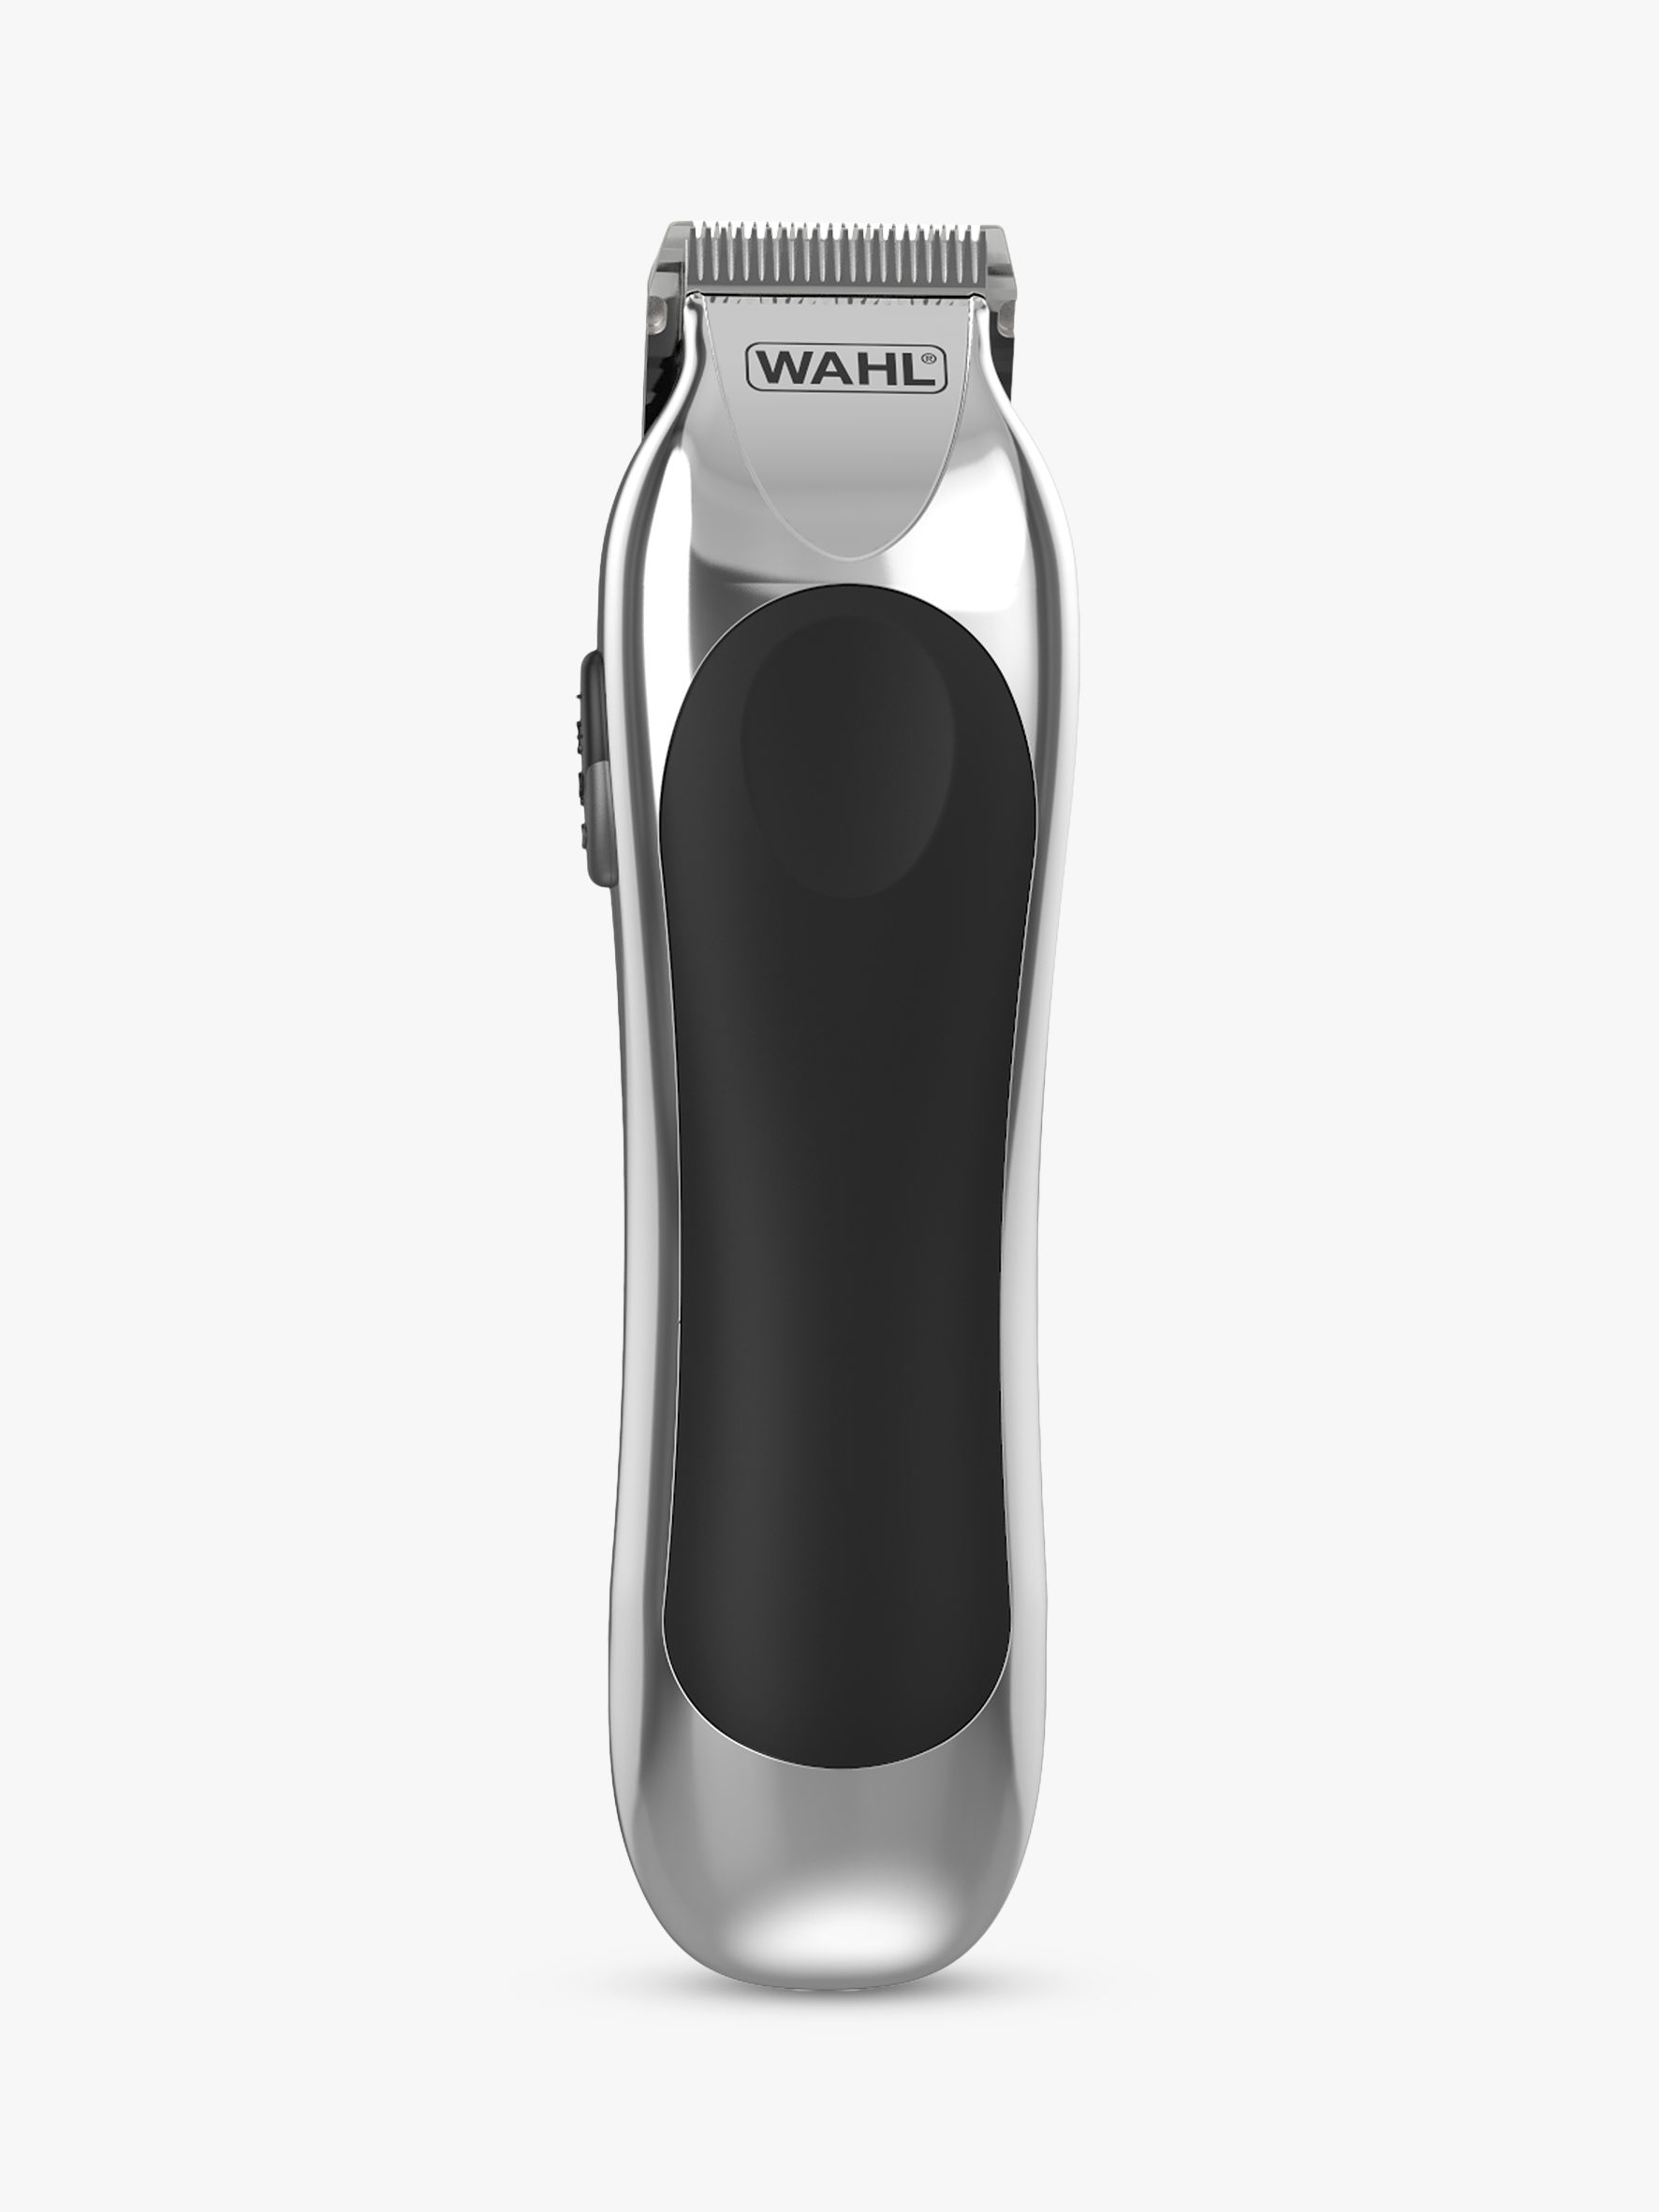 wahl clippers john lewis